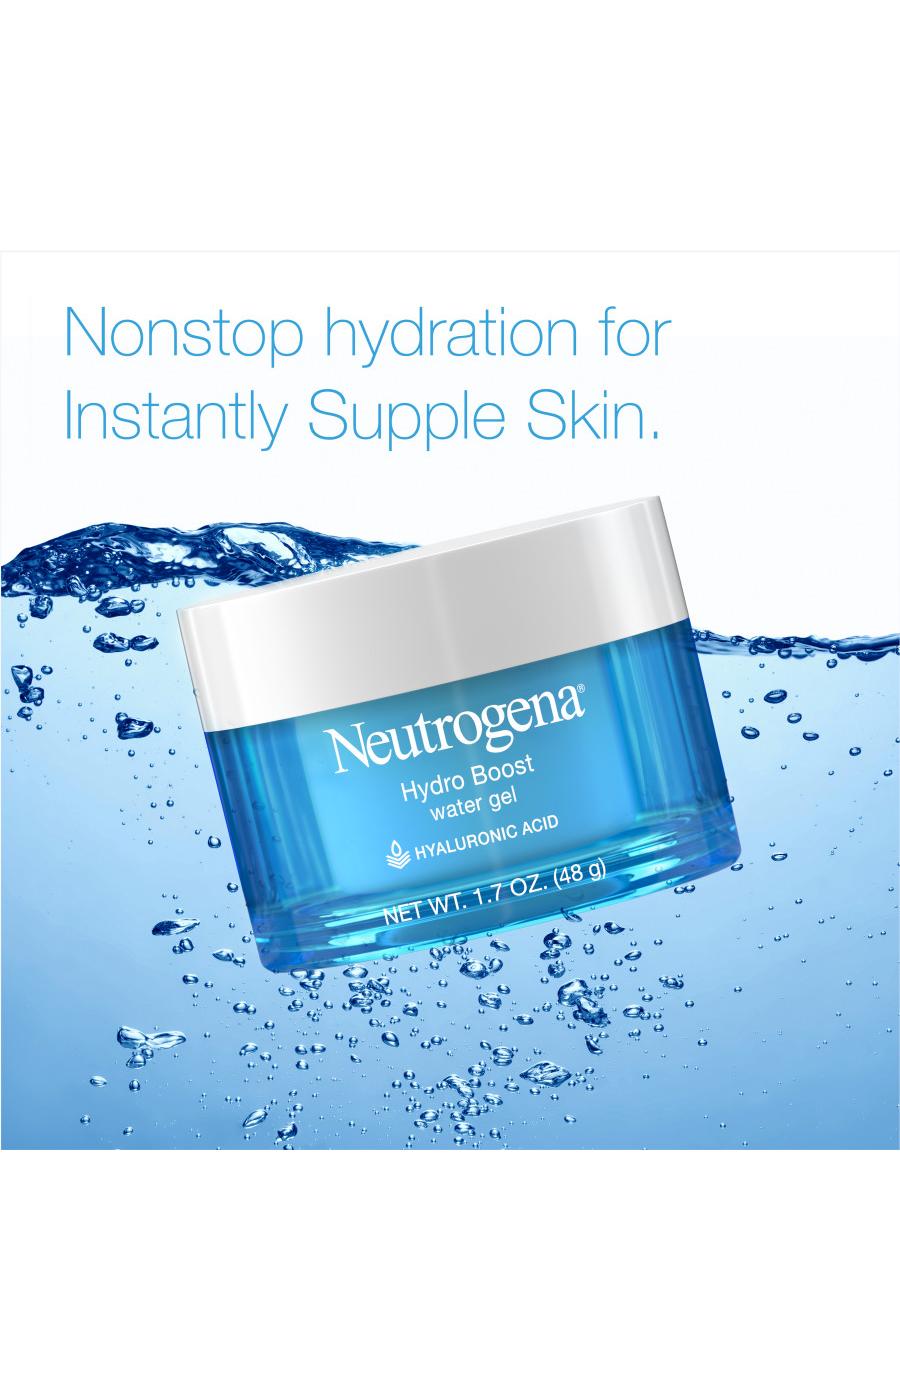 Afdeling engagement frokost Neutrogena Hydro Boost Water Gel - Shop Facial Moisturizer at H-E-B